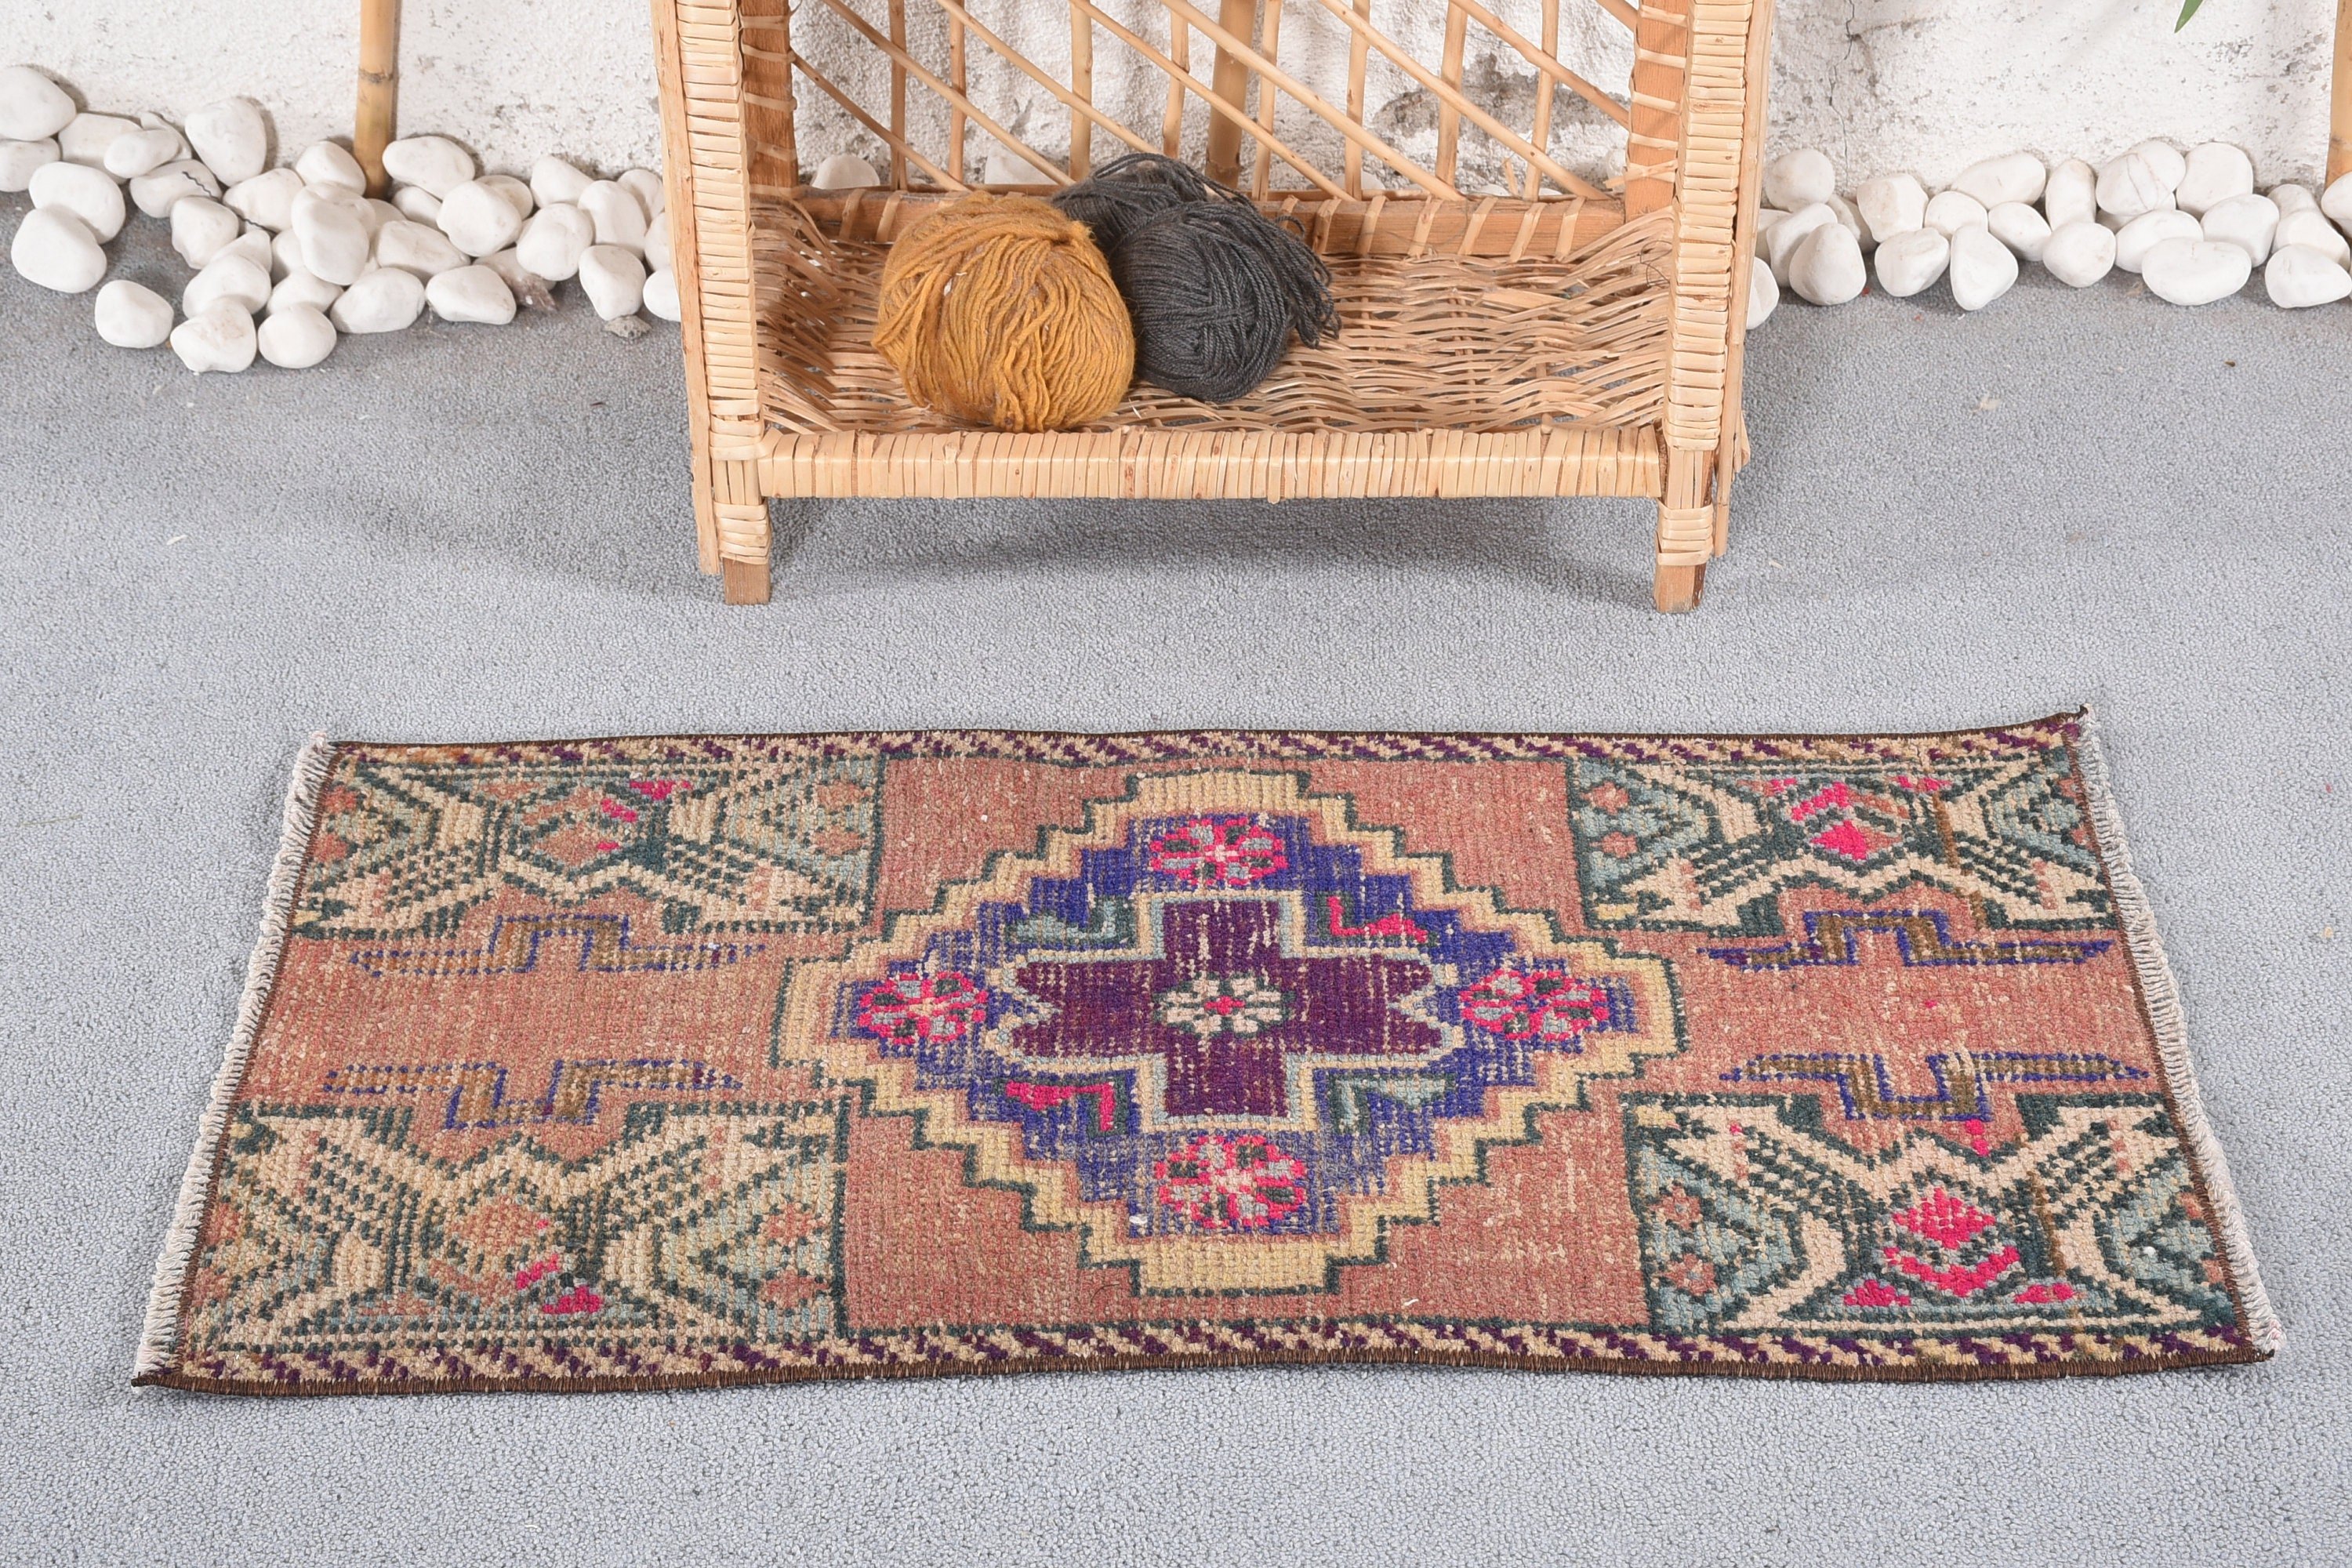 Floor Rugs, Car Mat Rug, 1.5x2.8 ft Small Rug, Pale Rug, Rugs for Entry, Brown Cool Rug, Cool Rug, Turkish Rug, Vintage Rugs, Kitchen Rug